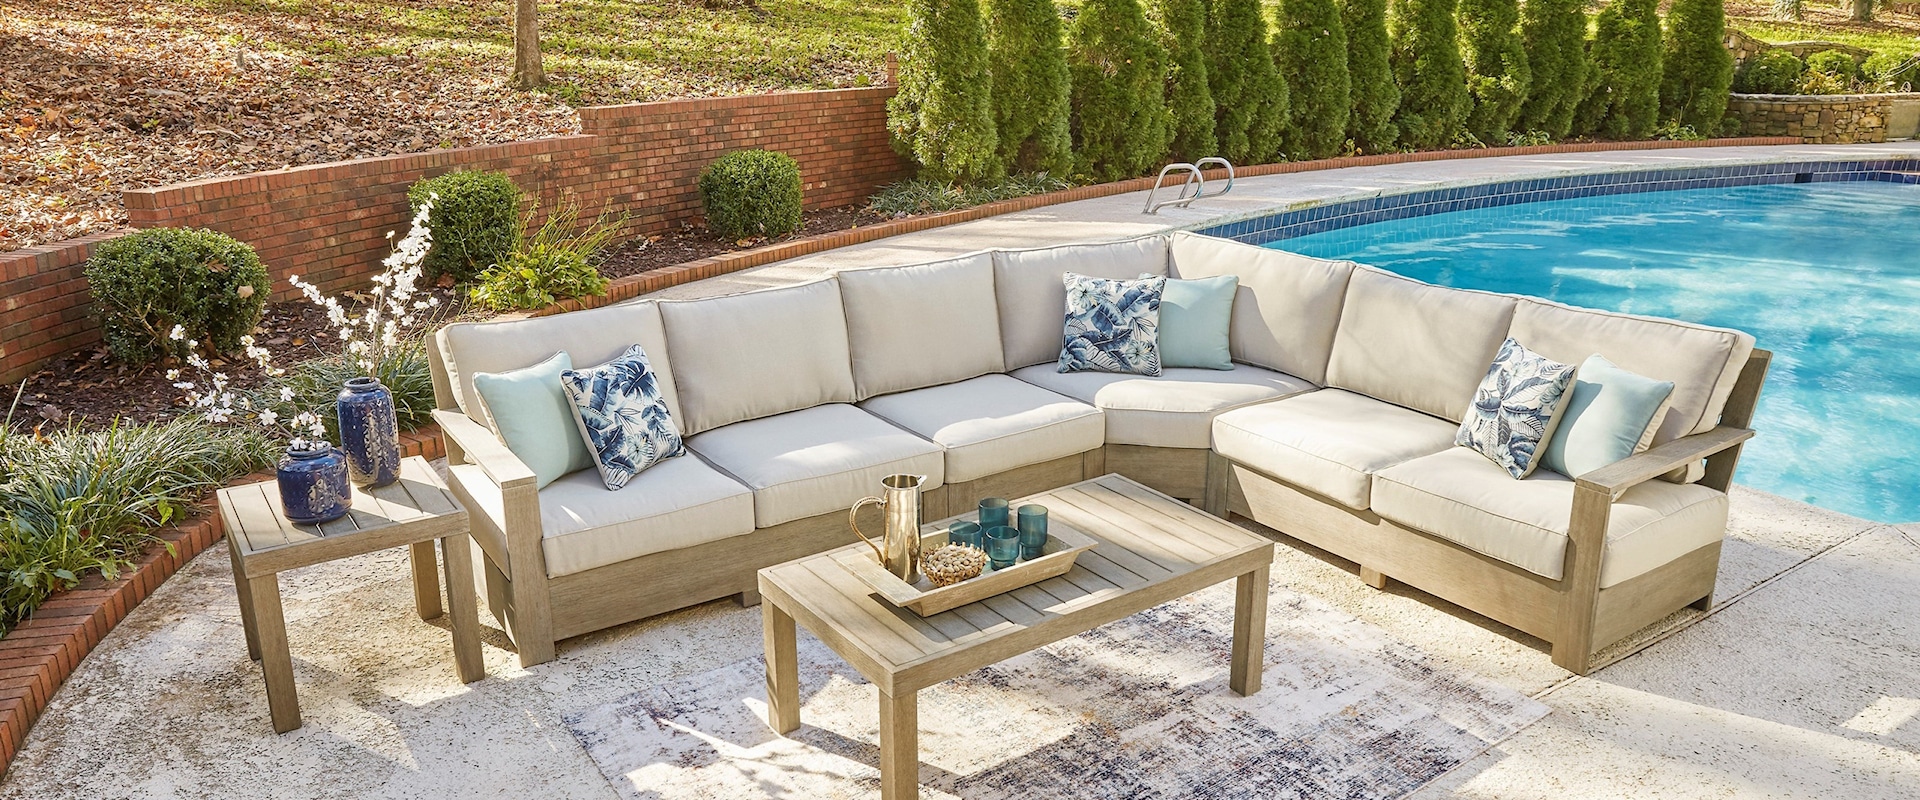 Outdoor Sectional Set with Tables